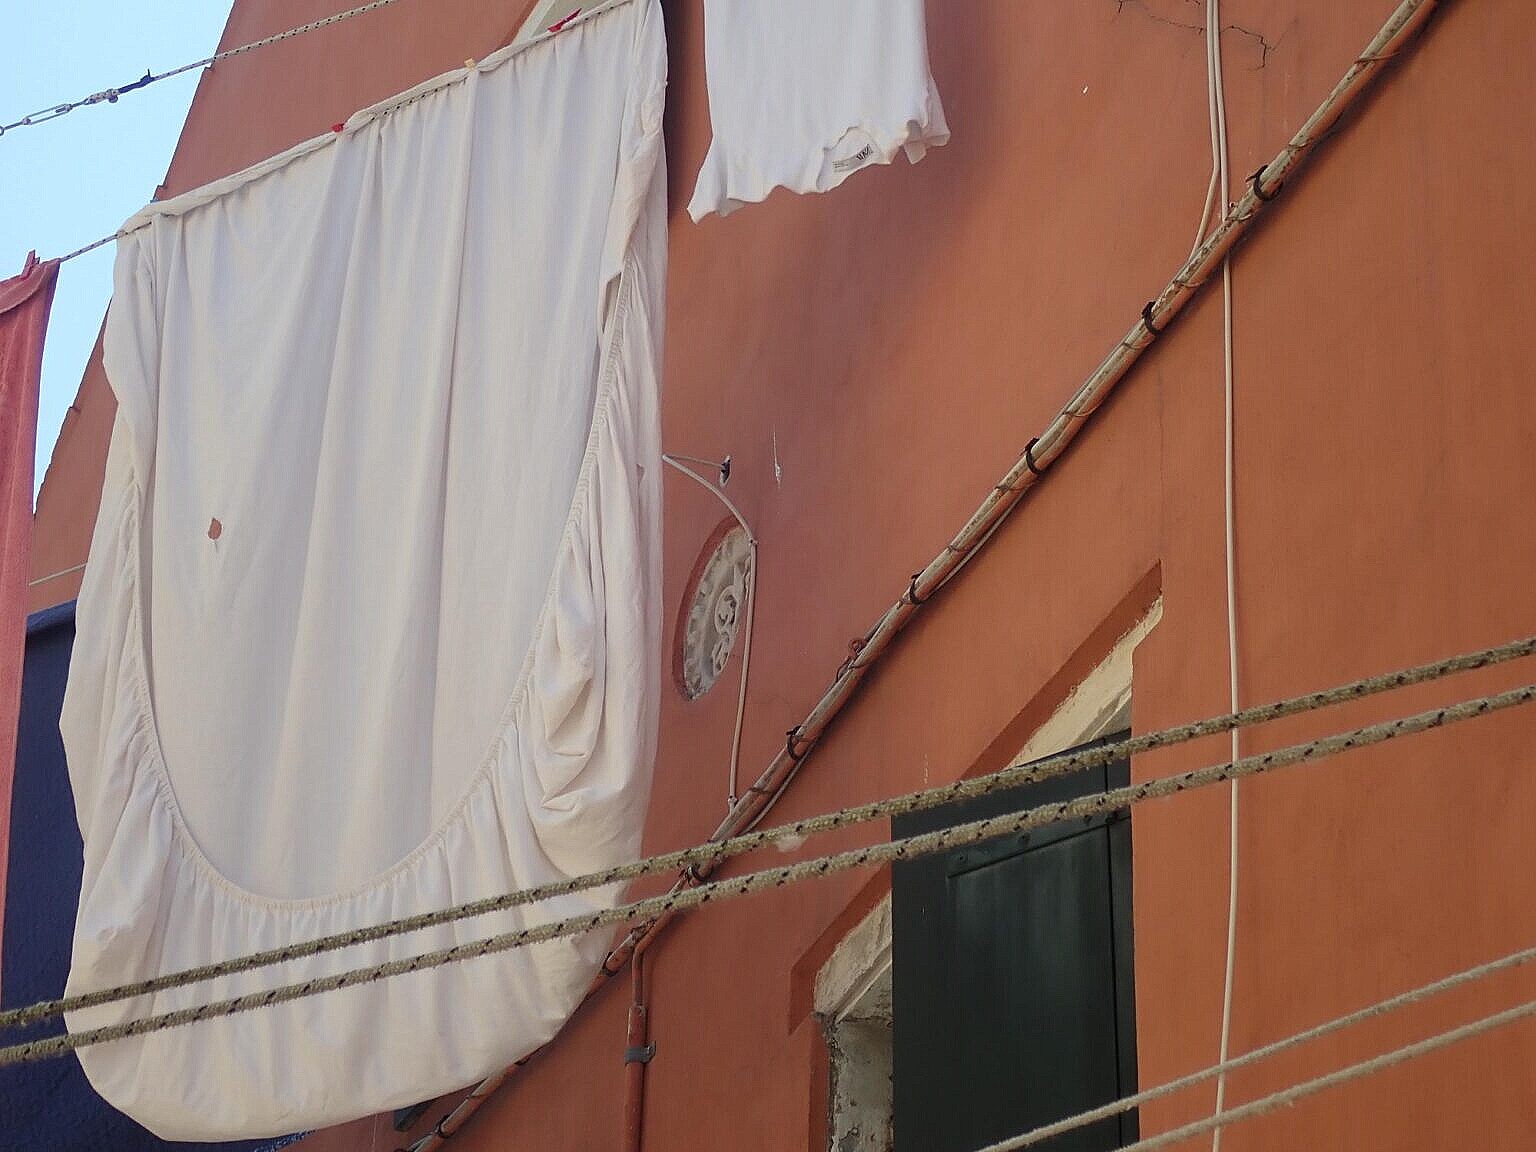 When paterae are high on the building, behind laundry hung to dry, they're not easy to spot.